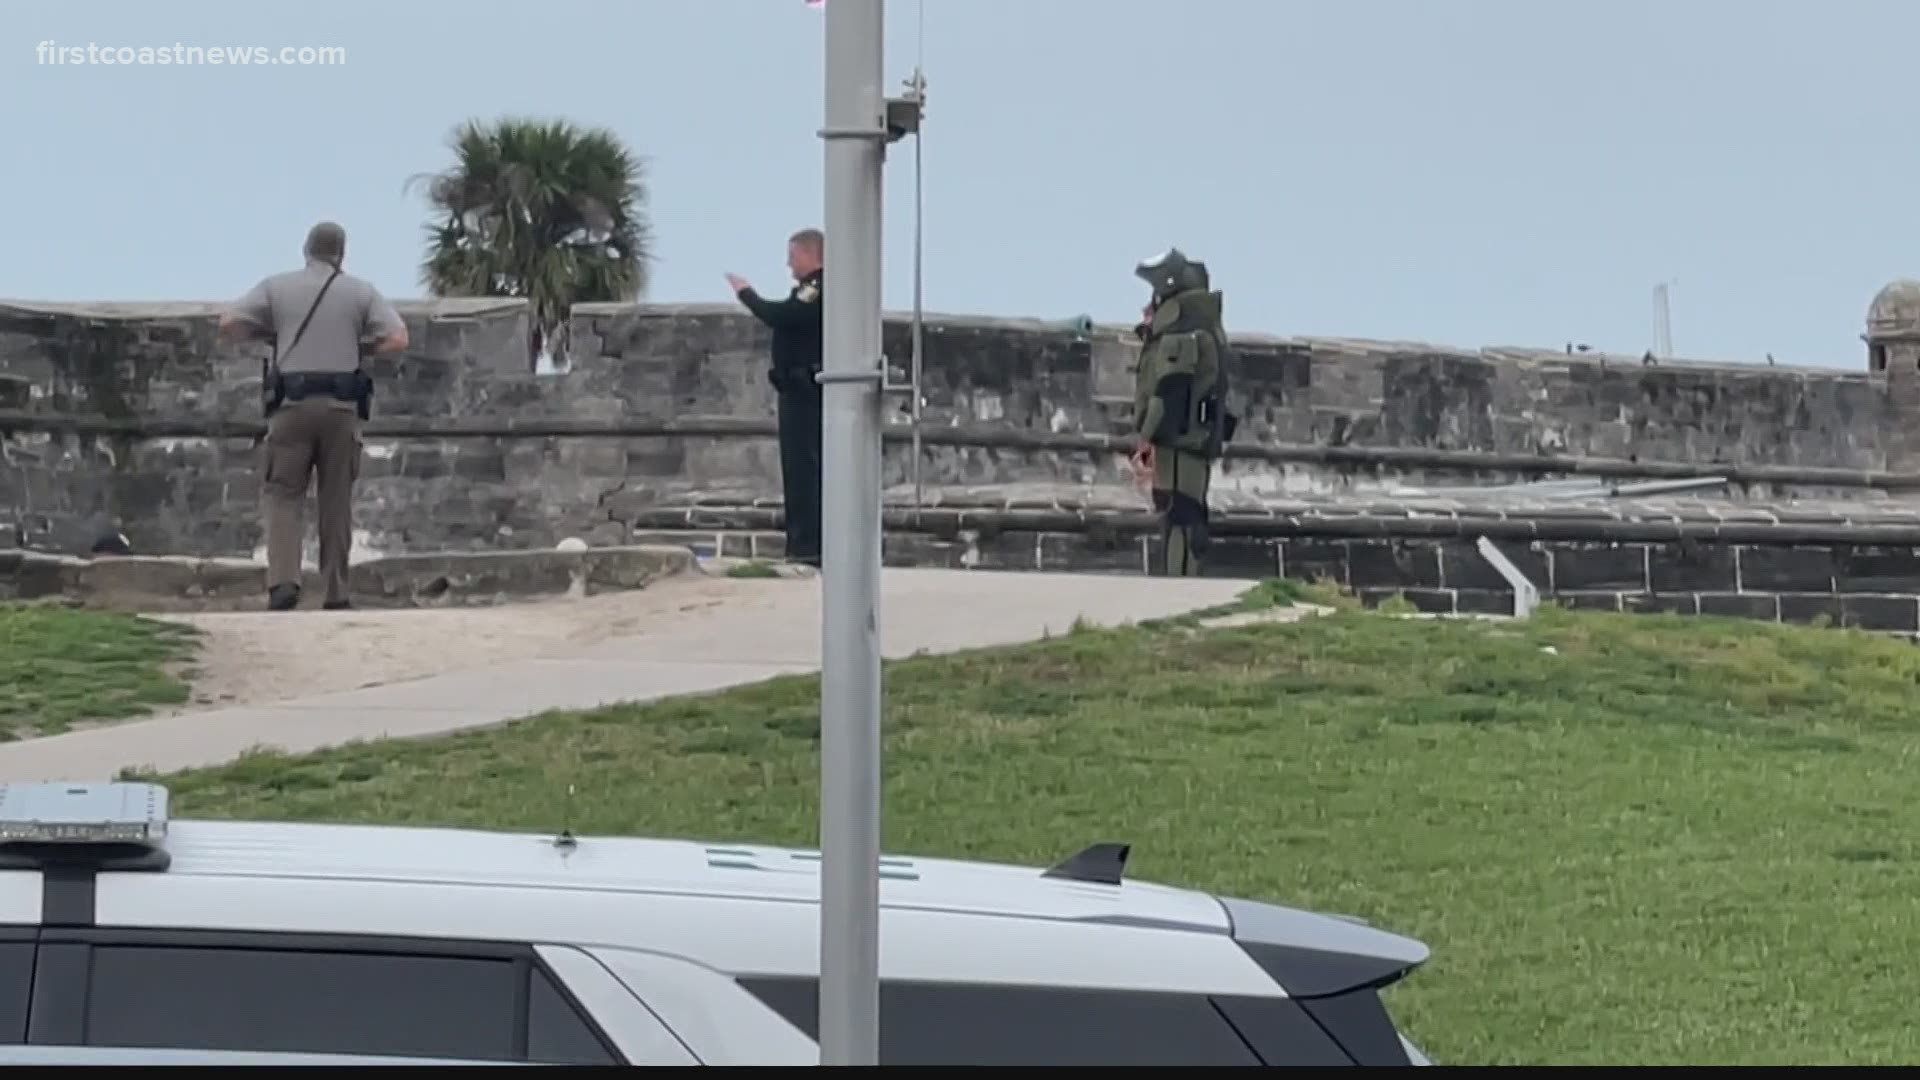 All clear given after suspicious package found at St. Augustine fort